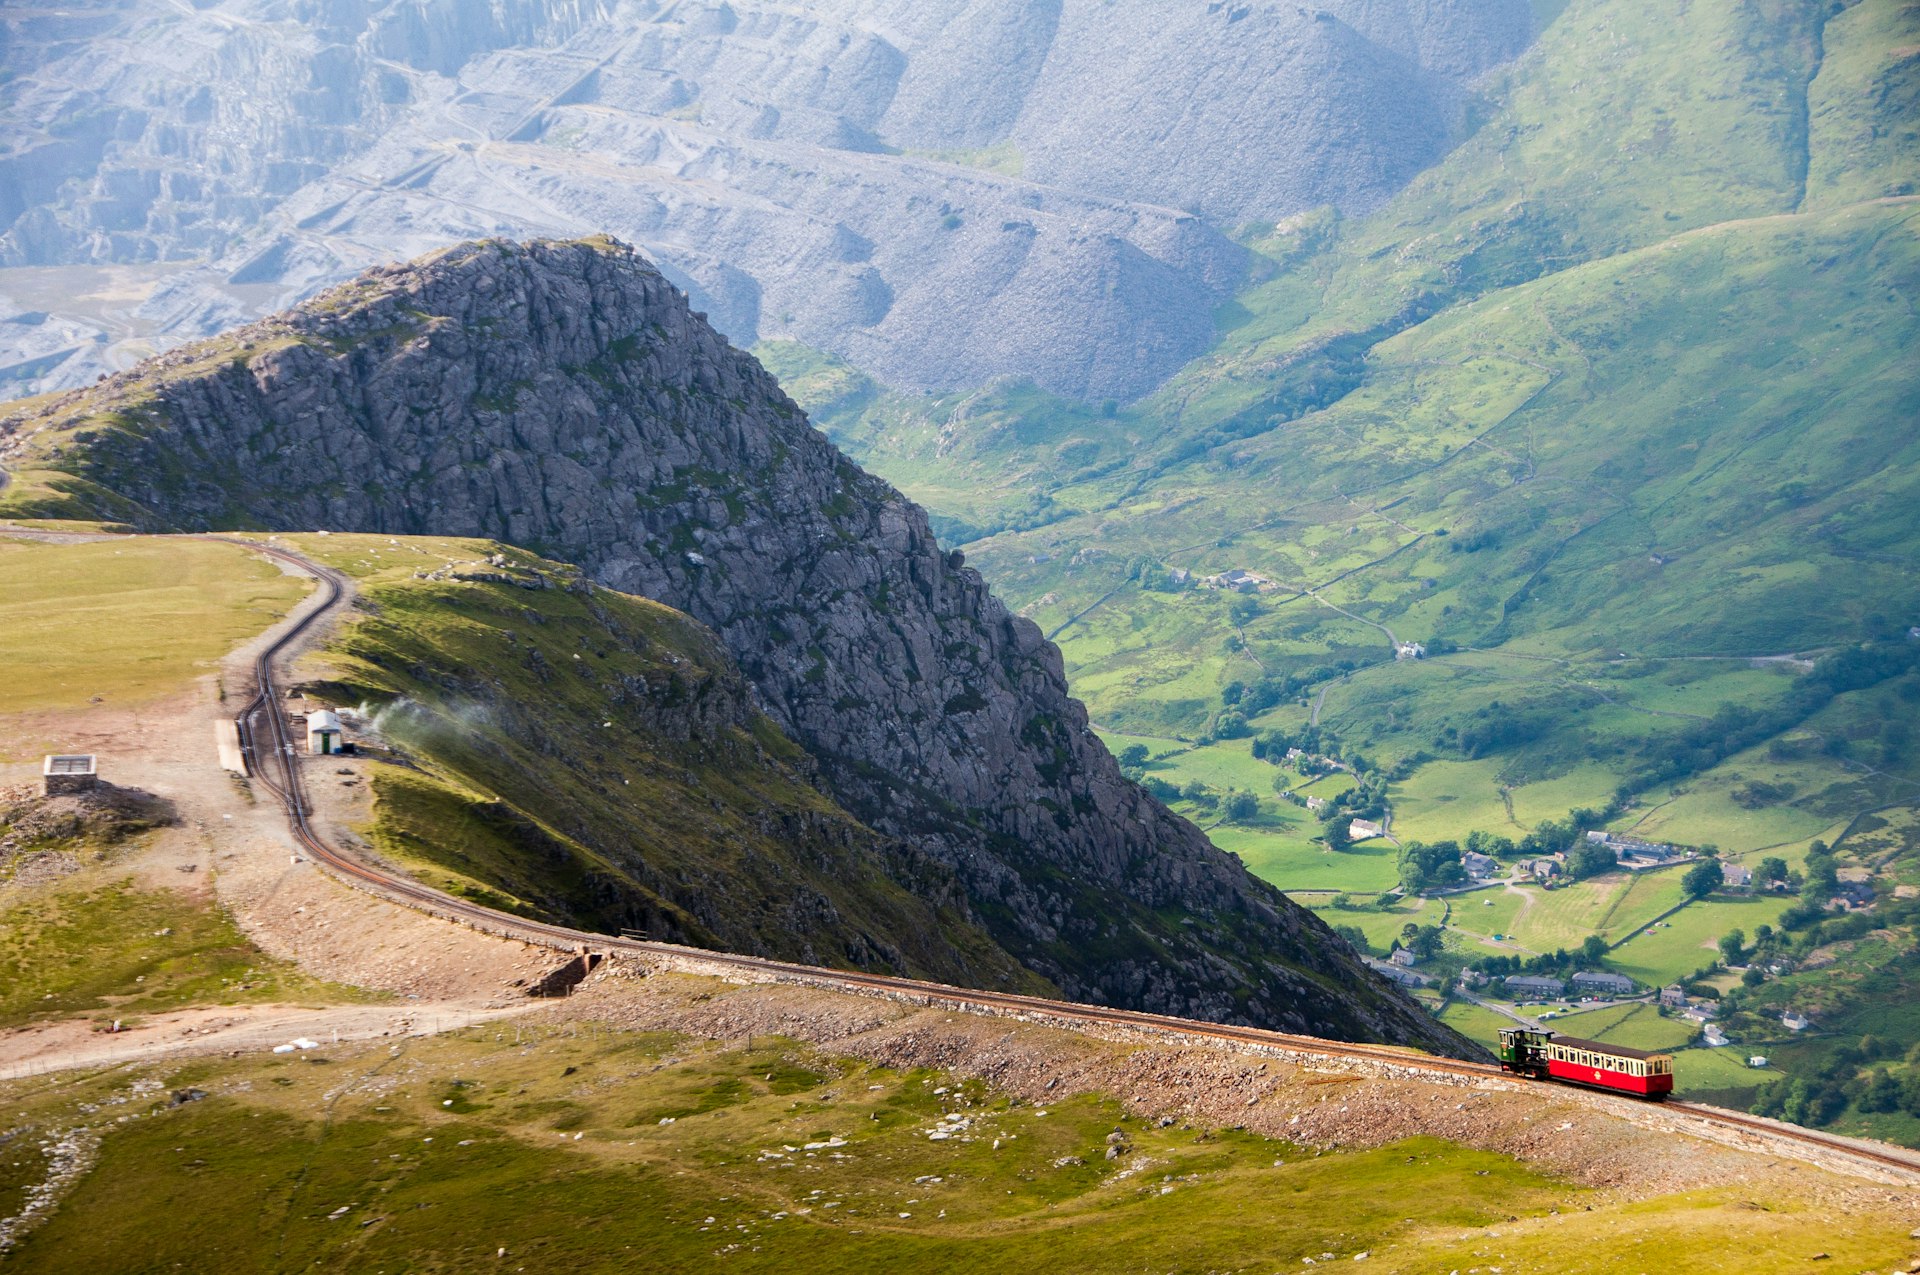 A train descends from the summit of Snowdon Mountain in Snowdonia National Park, Wales